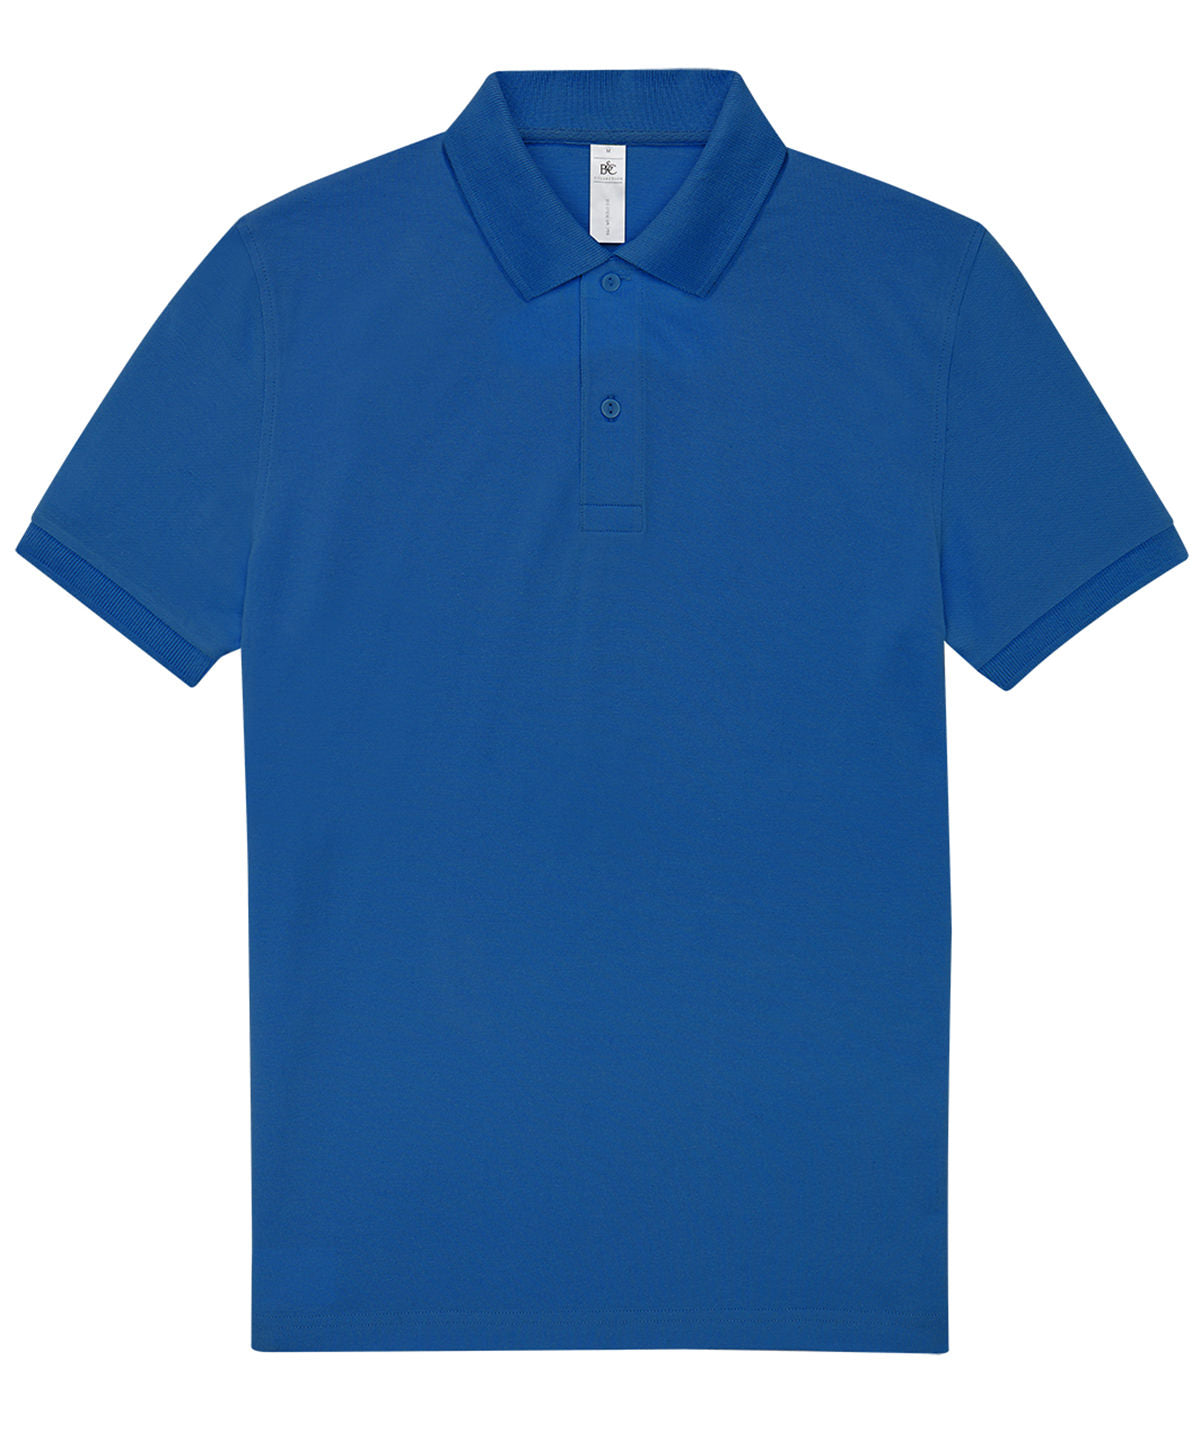 Personalised Polo Shirts - Teal B&C Collection B&C My Polo 210